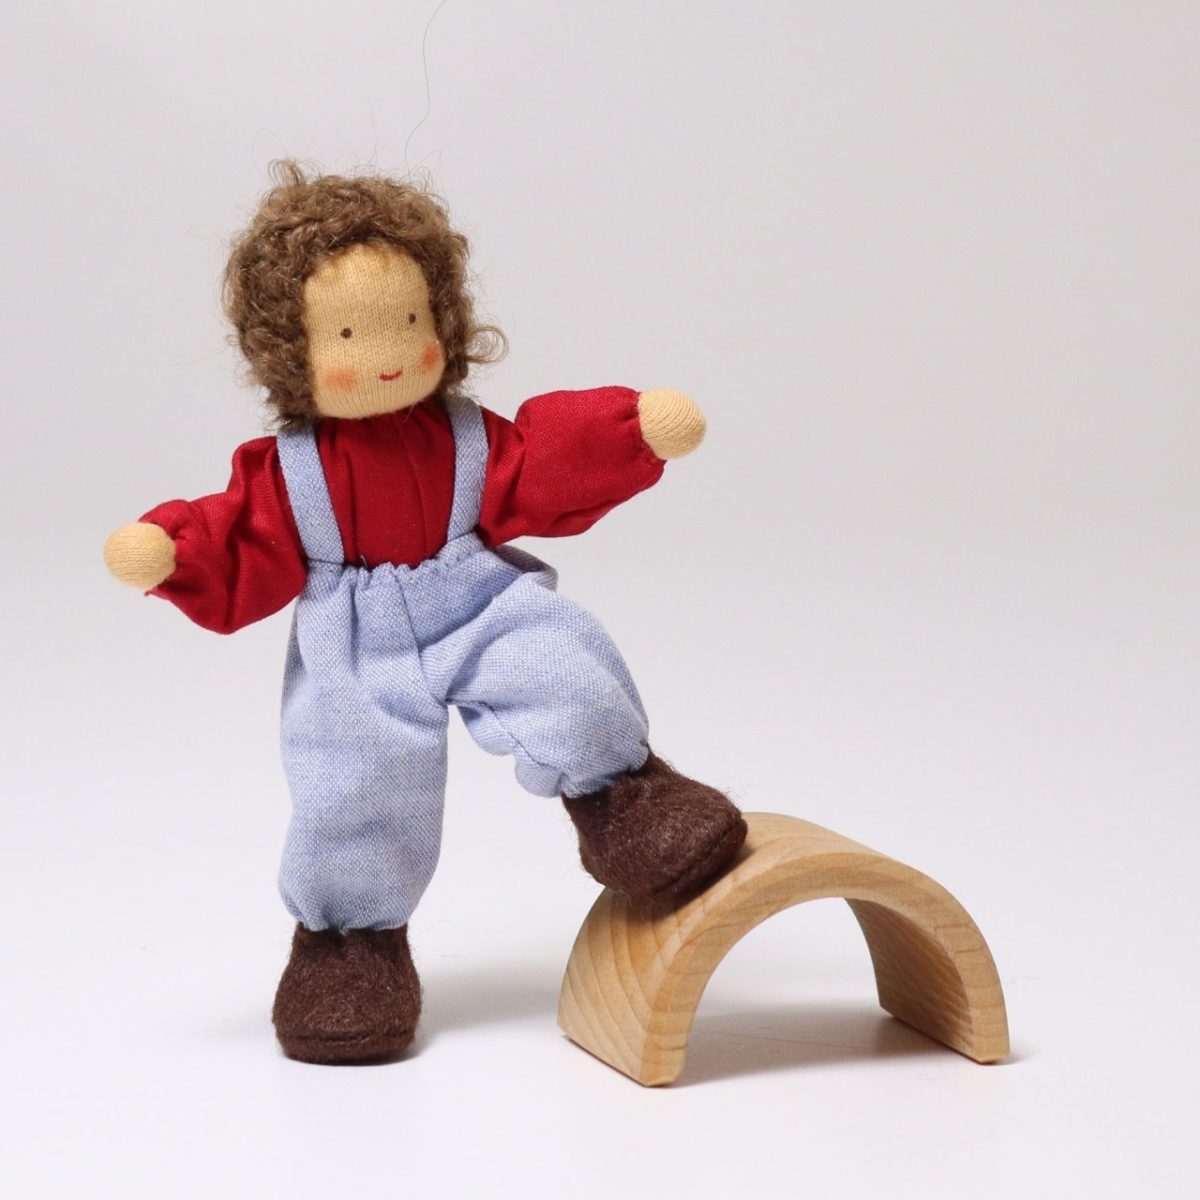 Grimm's Dolls House Doll - Brunette Boy - Peter | | Grimm's Spiel and Holz | Little Acorn to Mighty Oaks